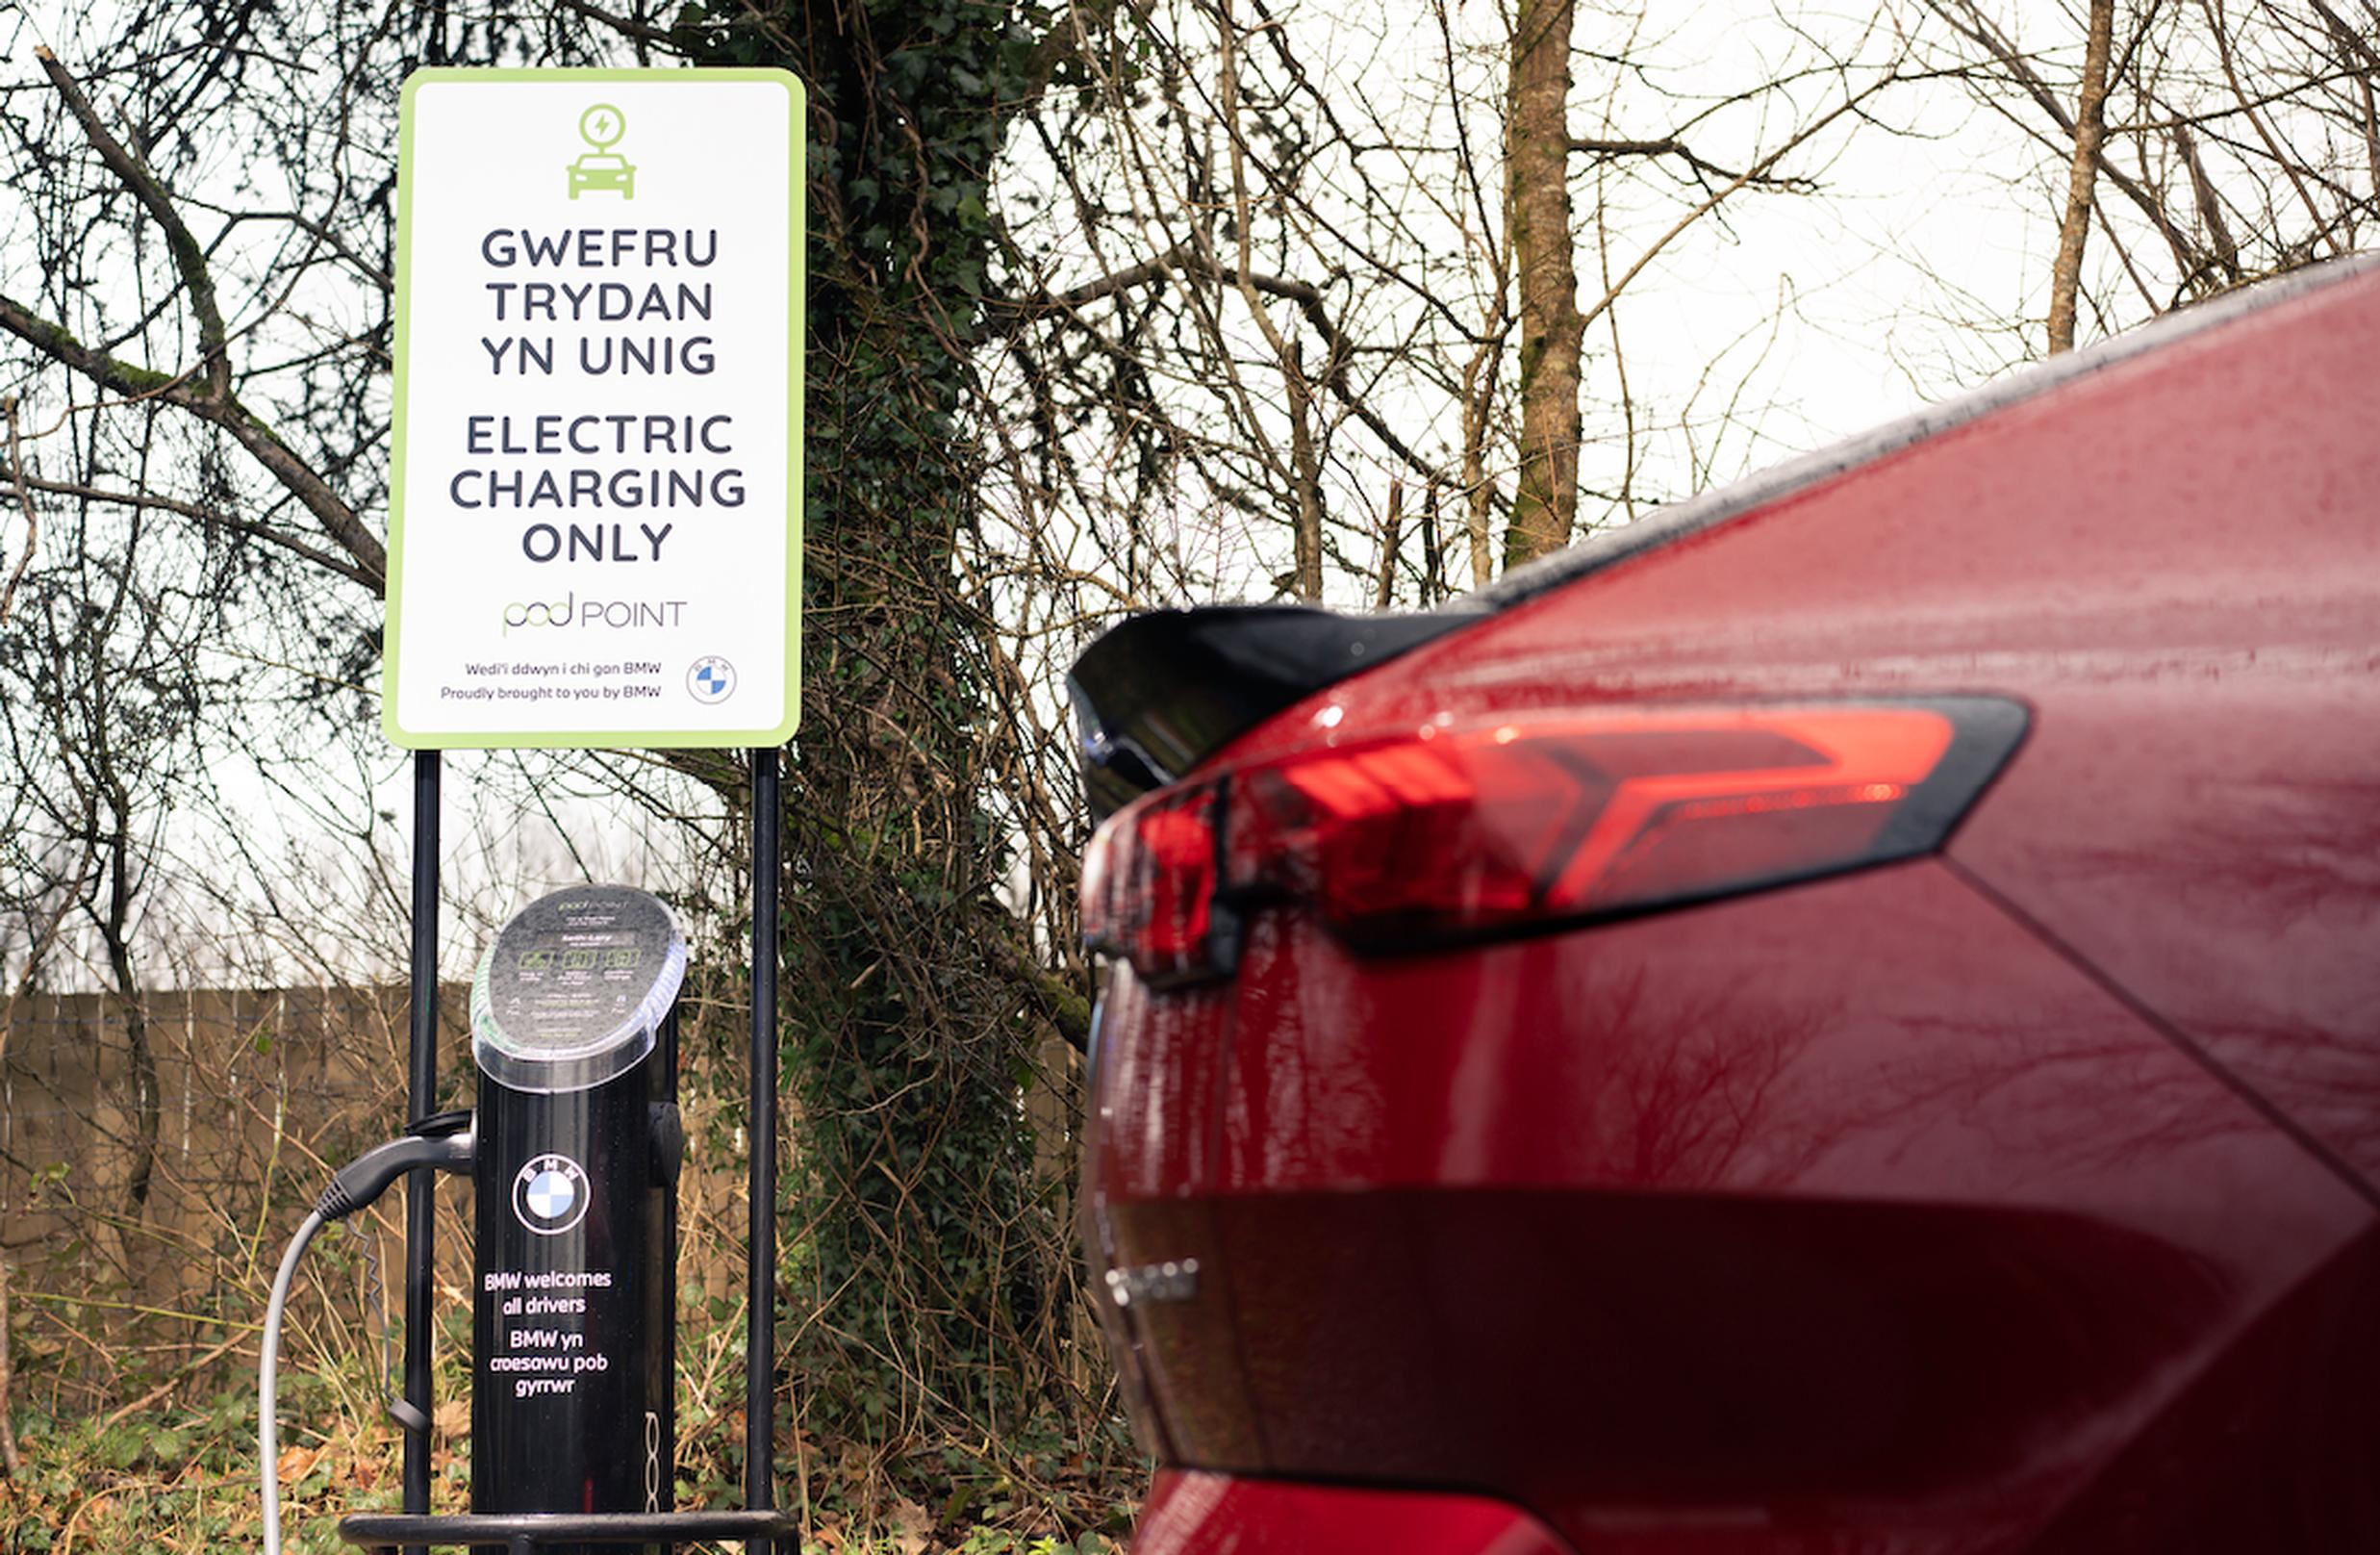 Recharge in Nature chargepoints go live at Bannau Brycheiniog National Park